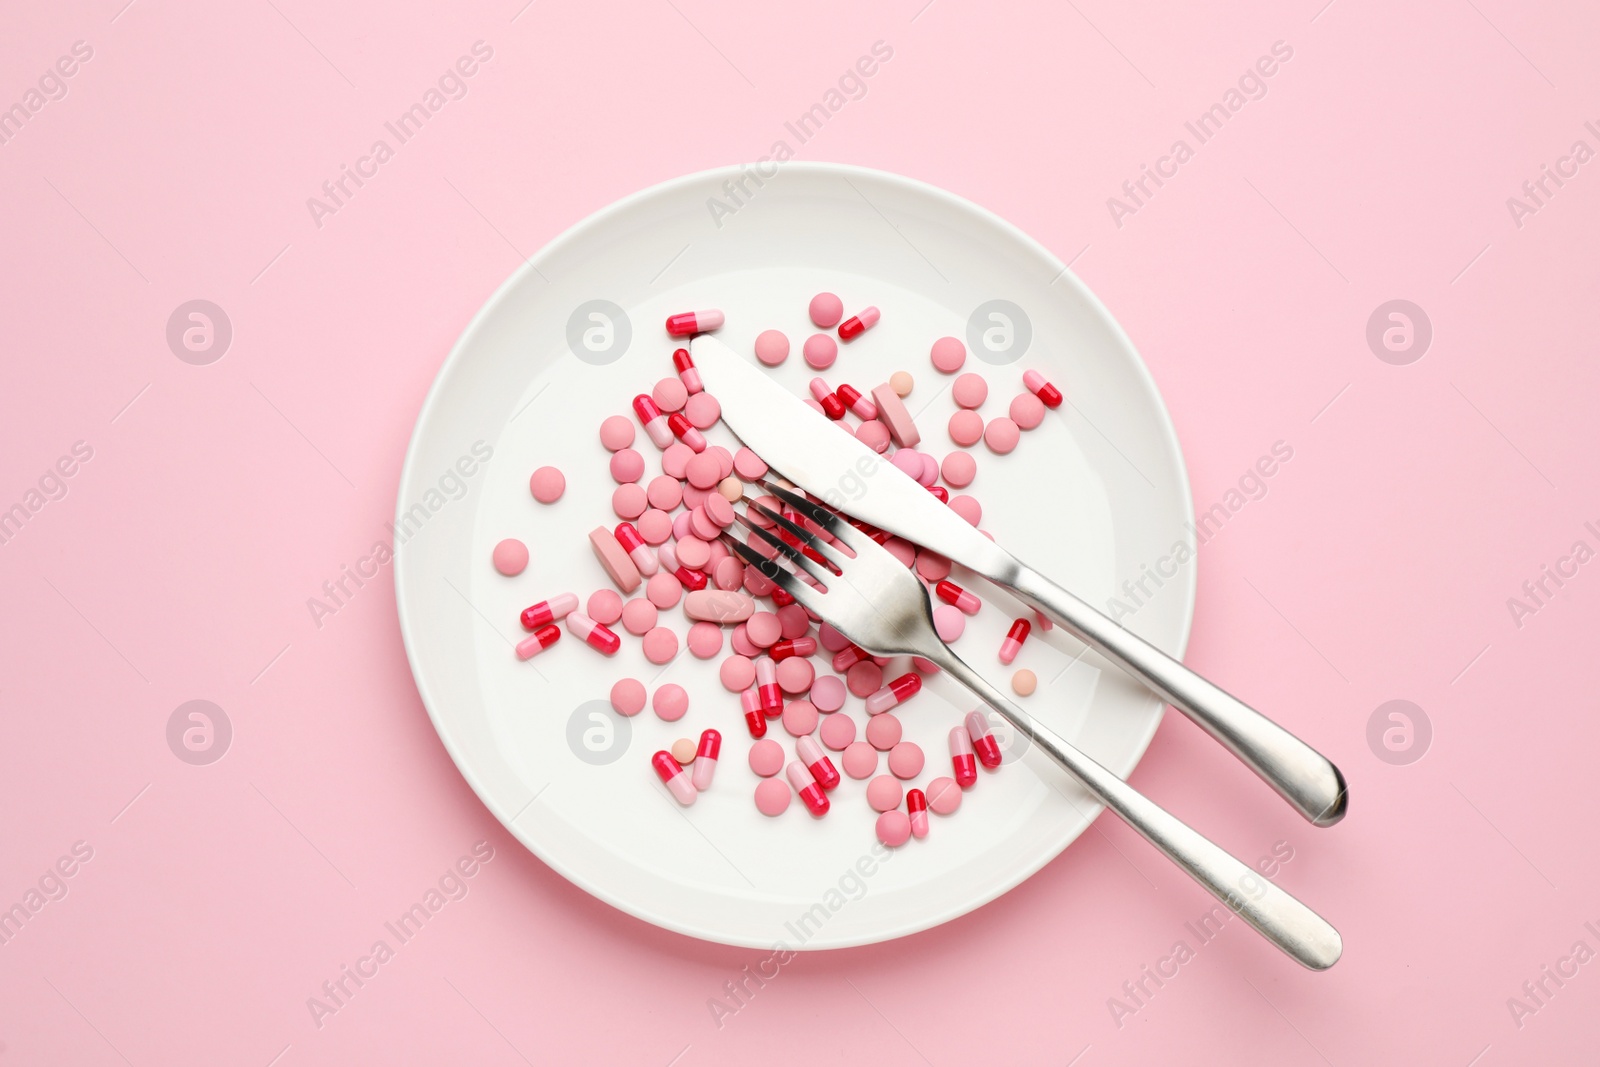 Photo of Plate with weight loss pills and cutlery on pink background, top view